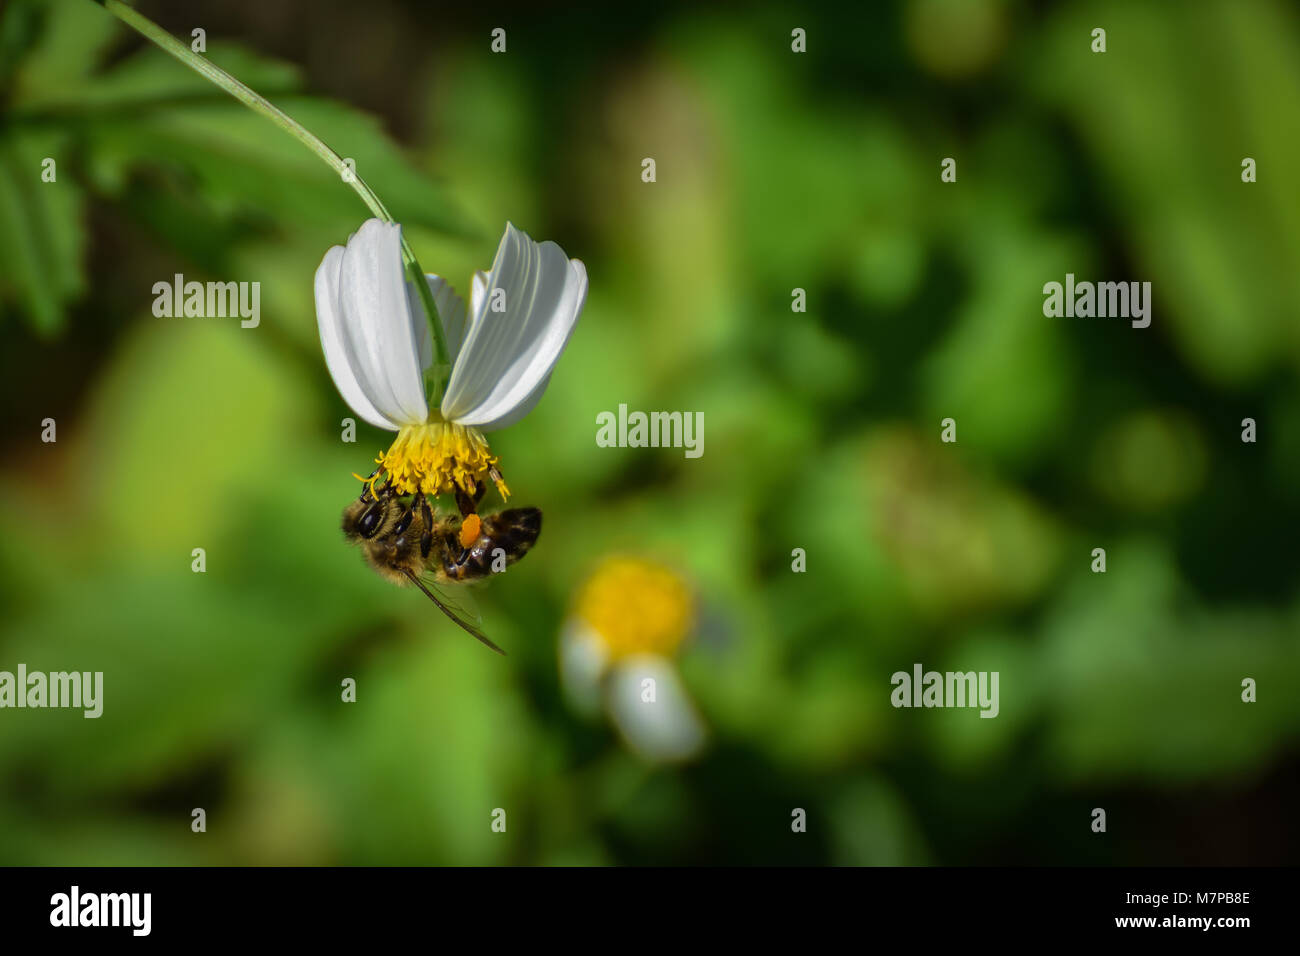 A honeybee visits a white flower Stock Photo